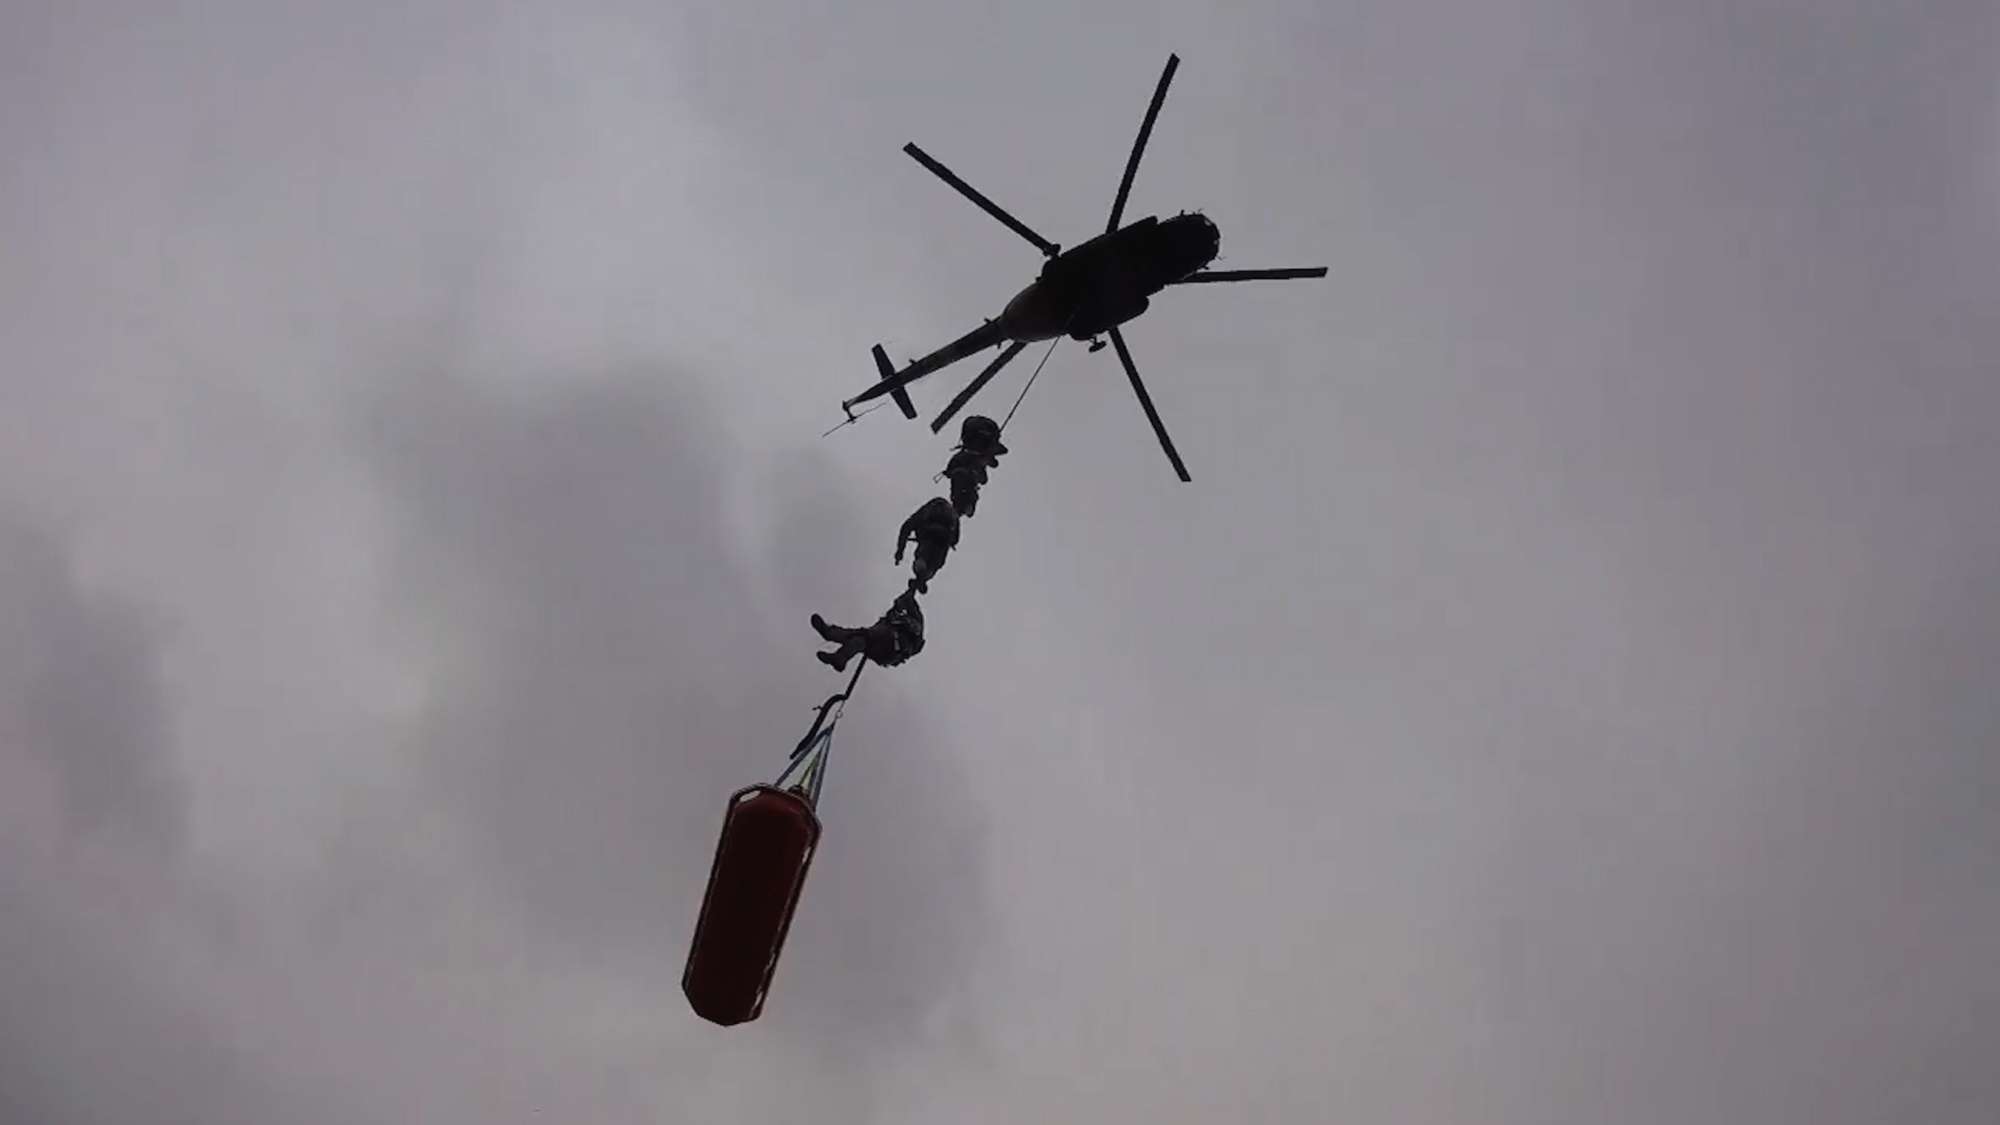 Read more about the article Ukrainian Troops Train To Evacuate The Wounded With Rope Under Mi-8 Helicopter